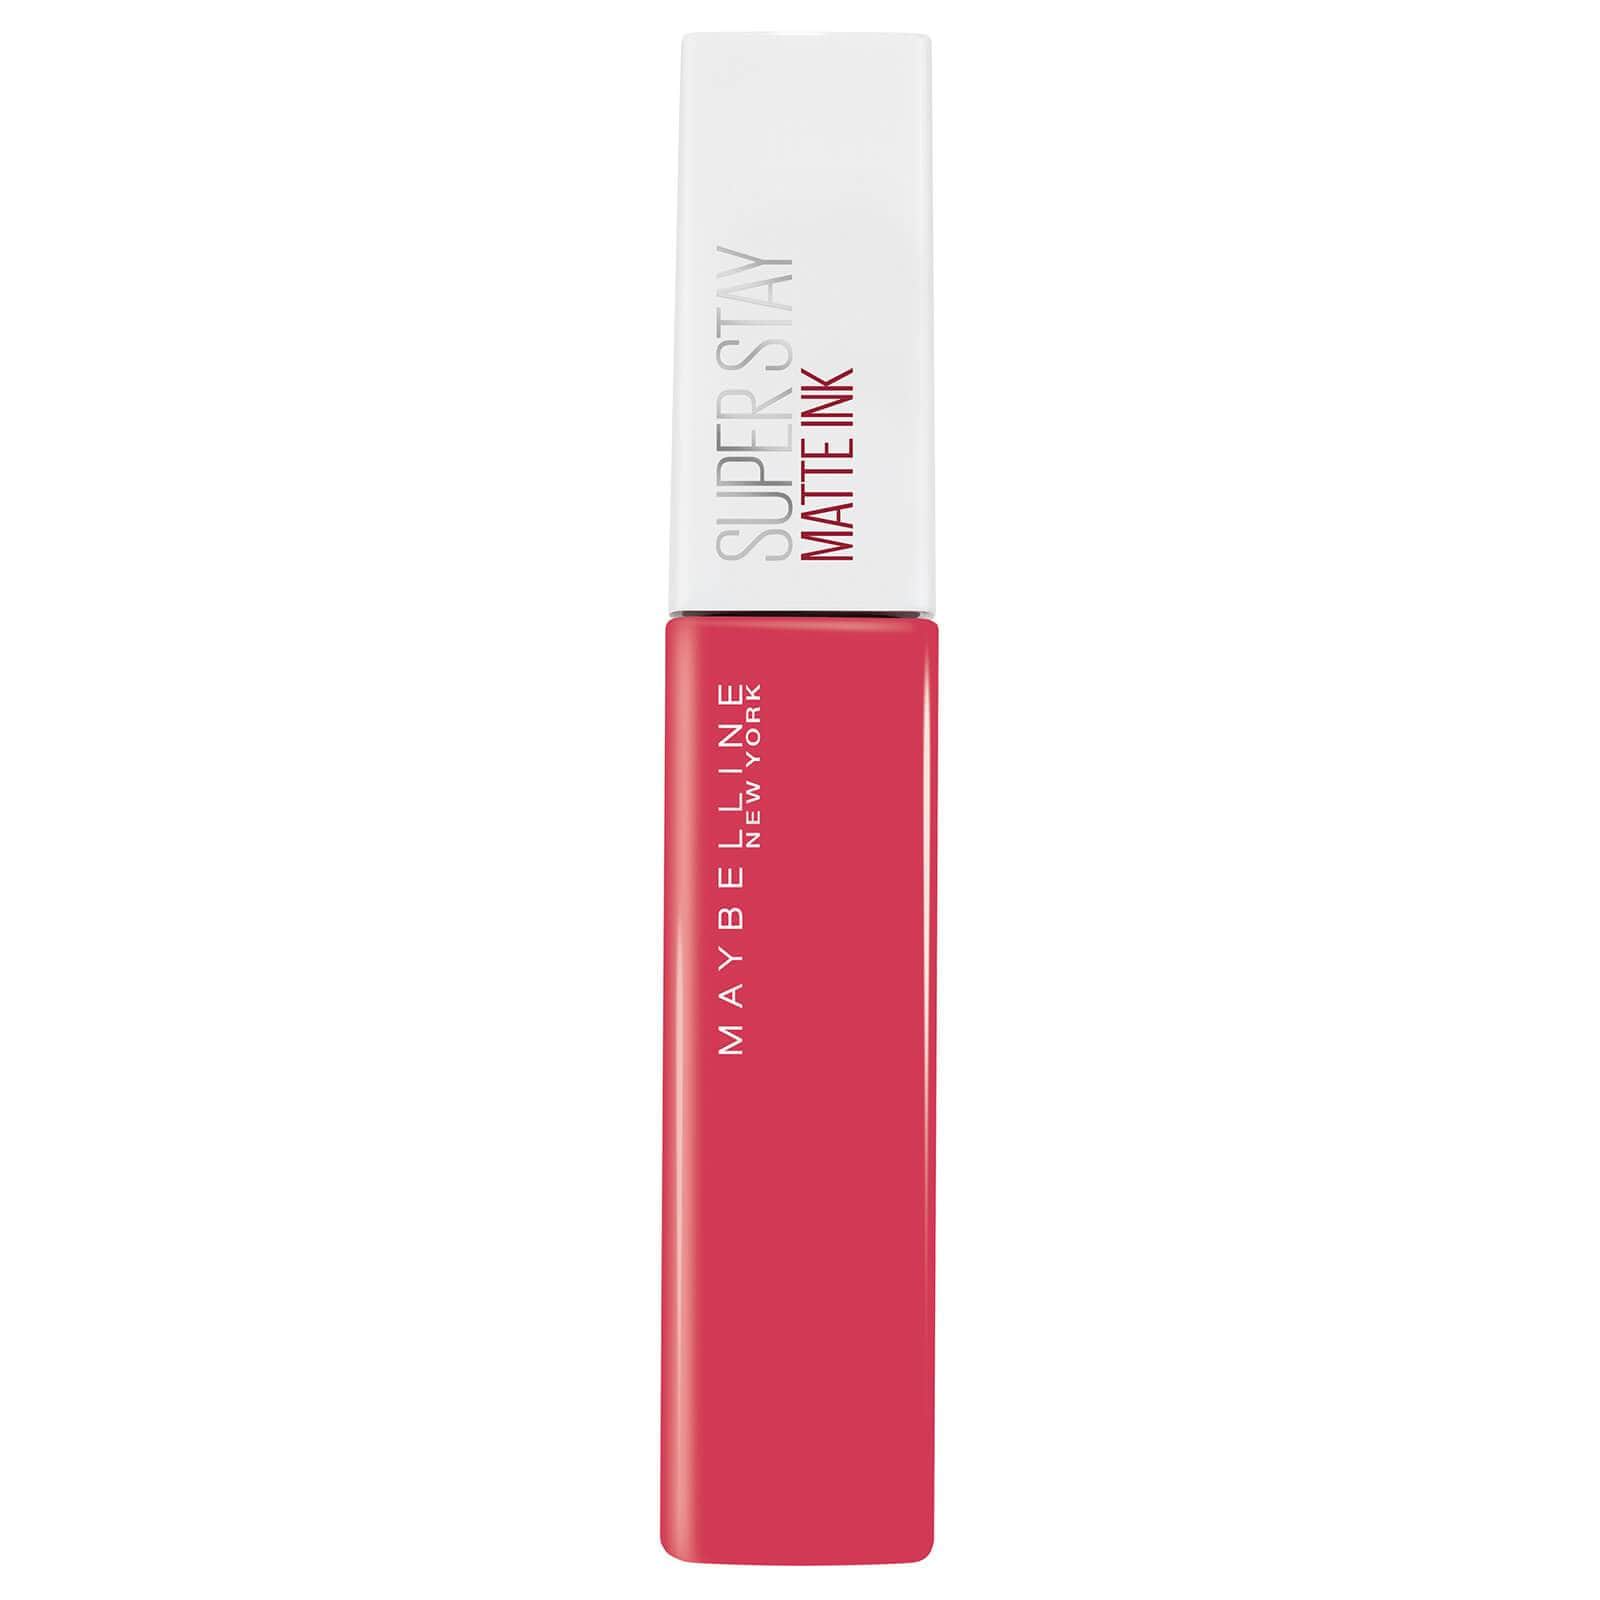 Maybelline Super Stay 24 Matte Lipstick (Various Shades) - Give Us Beauty